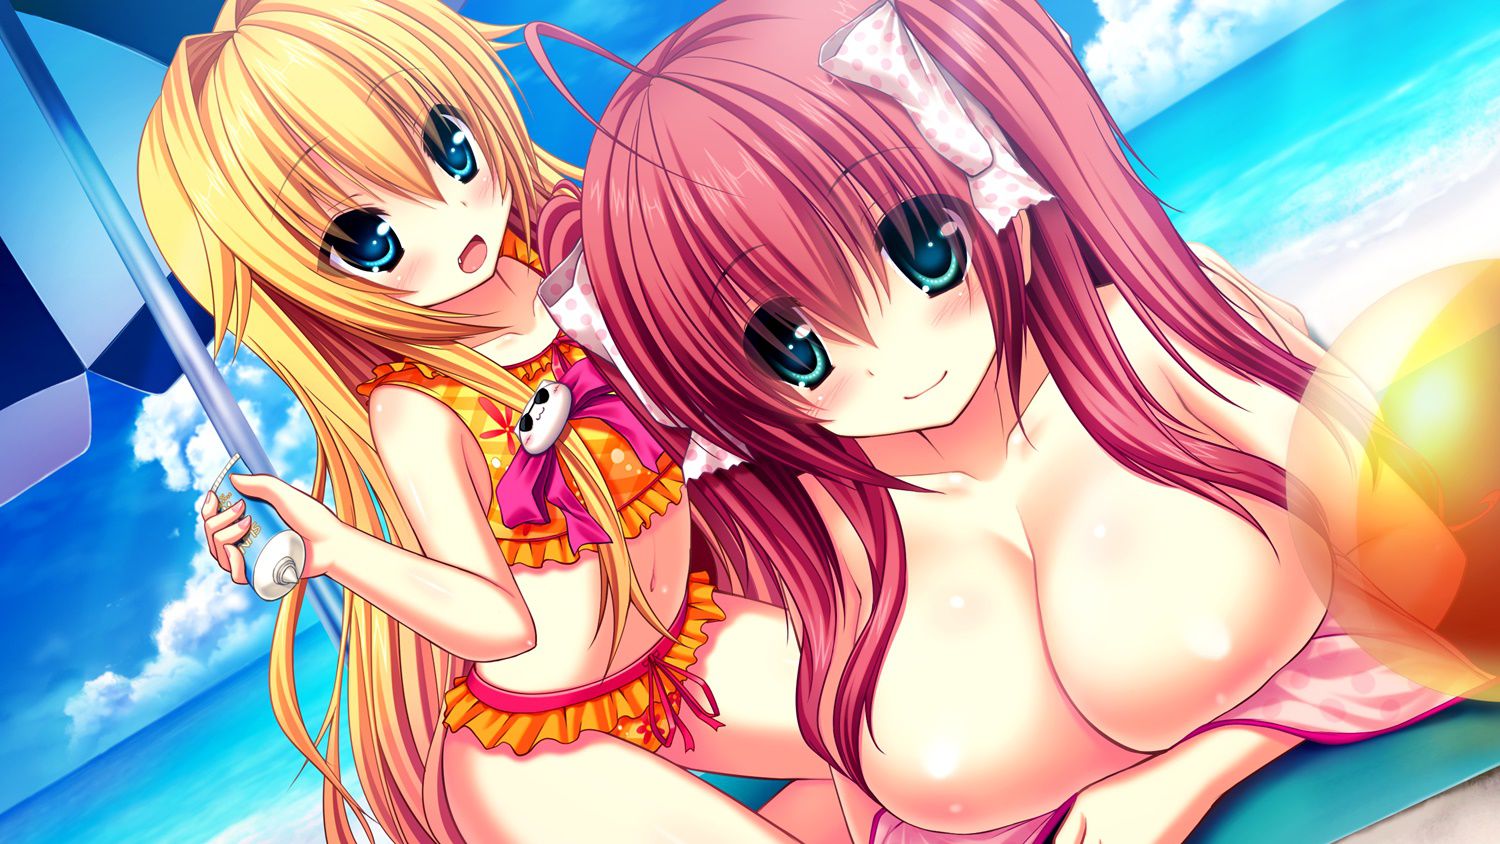 Namickideration [under age 18 prohibited eroge CG] wallpapers, images 9